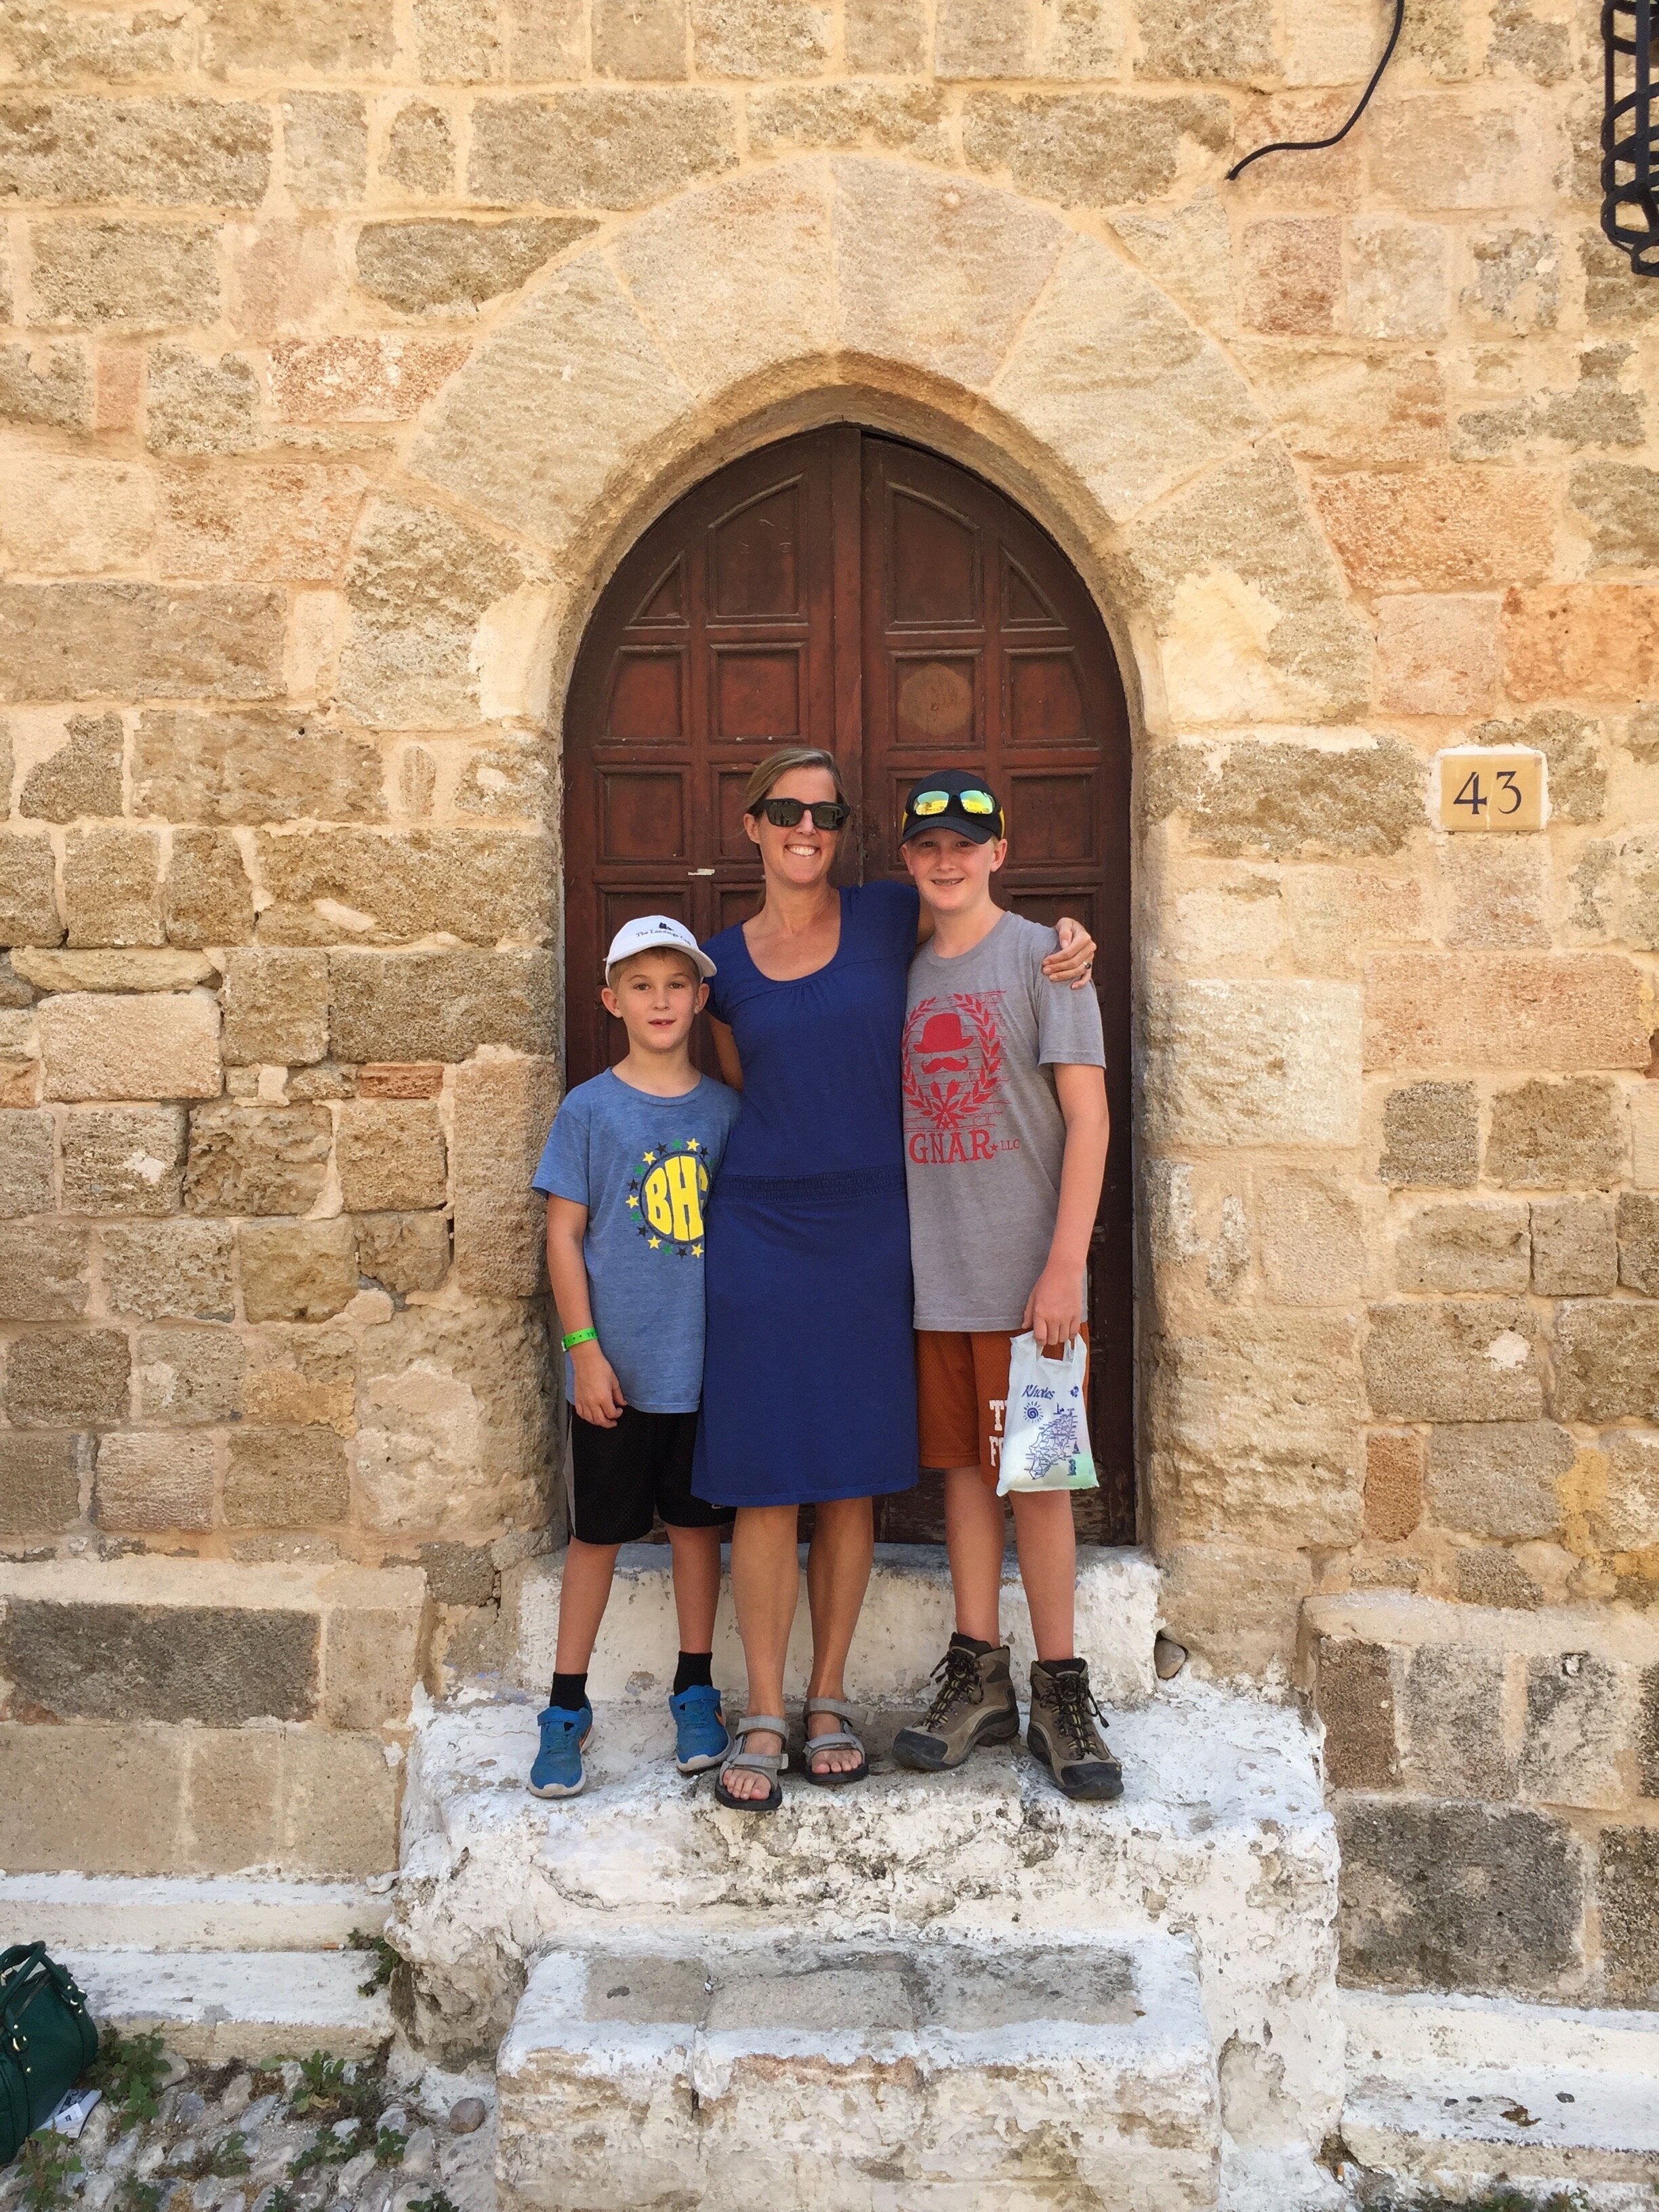 Rhodes, Greece, where we walked around "Old Town," but the Perkins family headed to the beach.